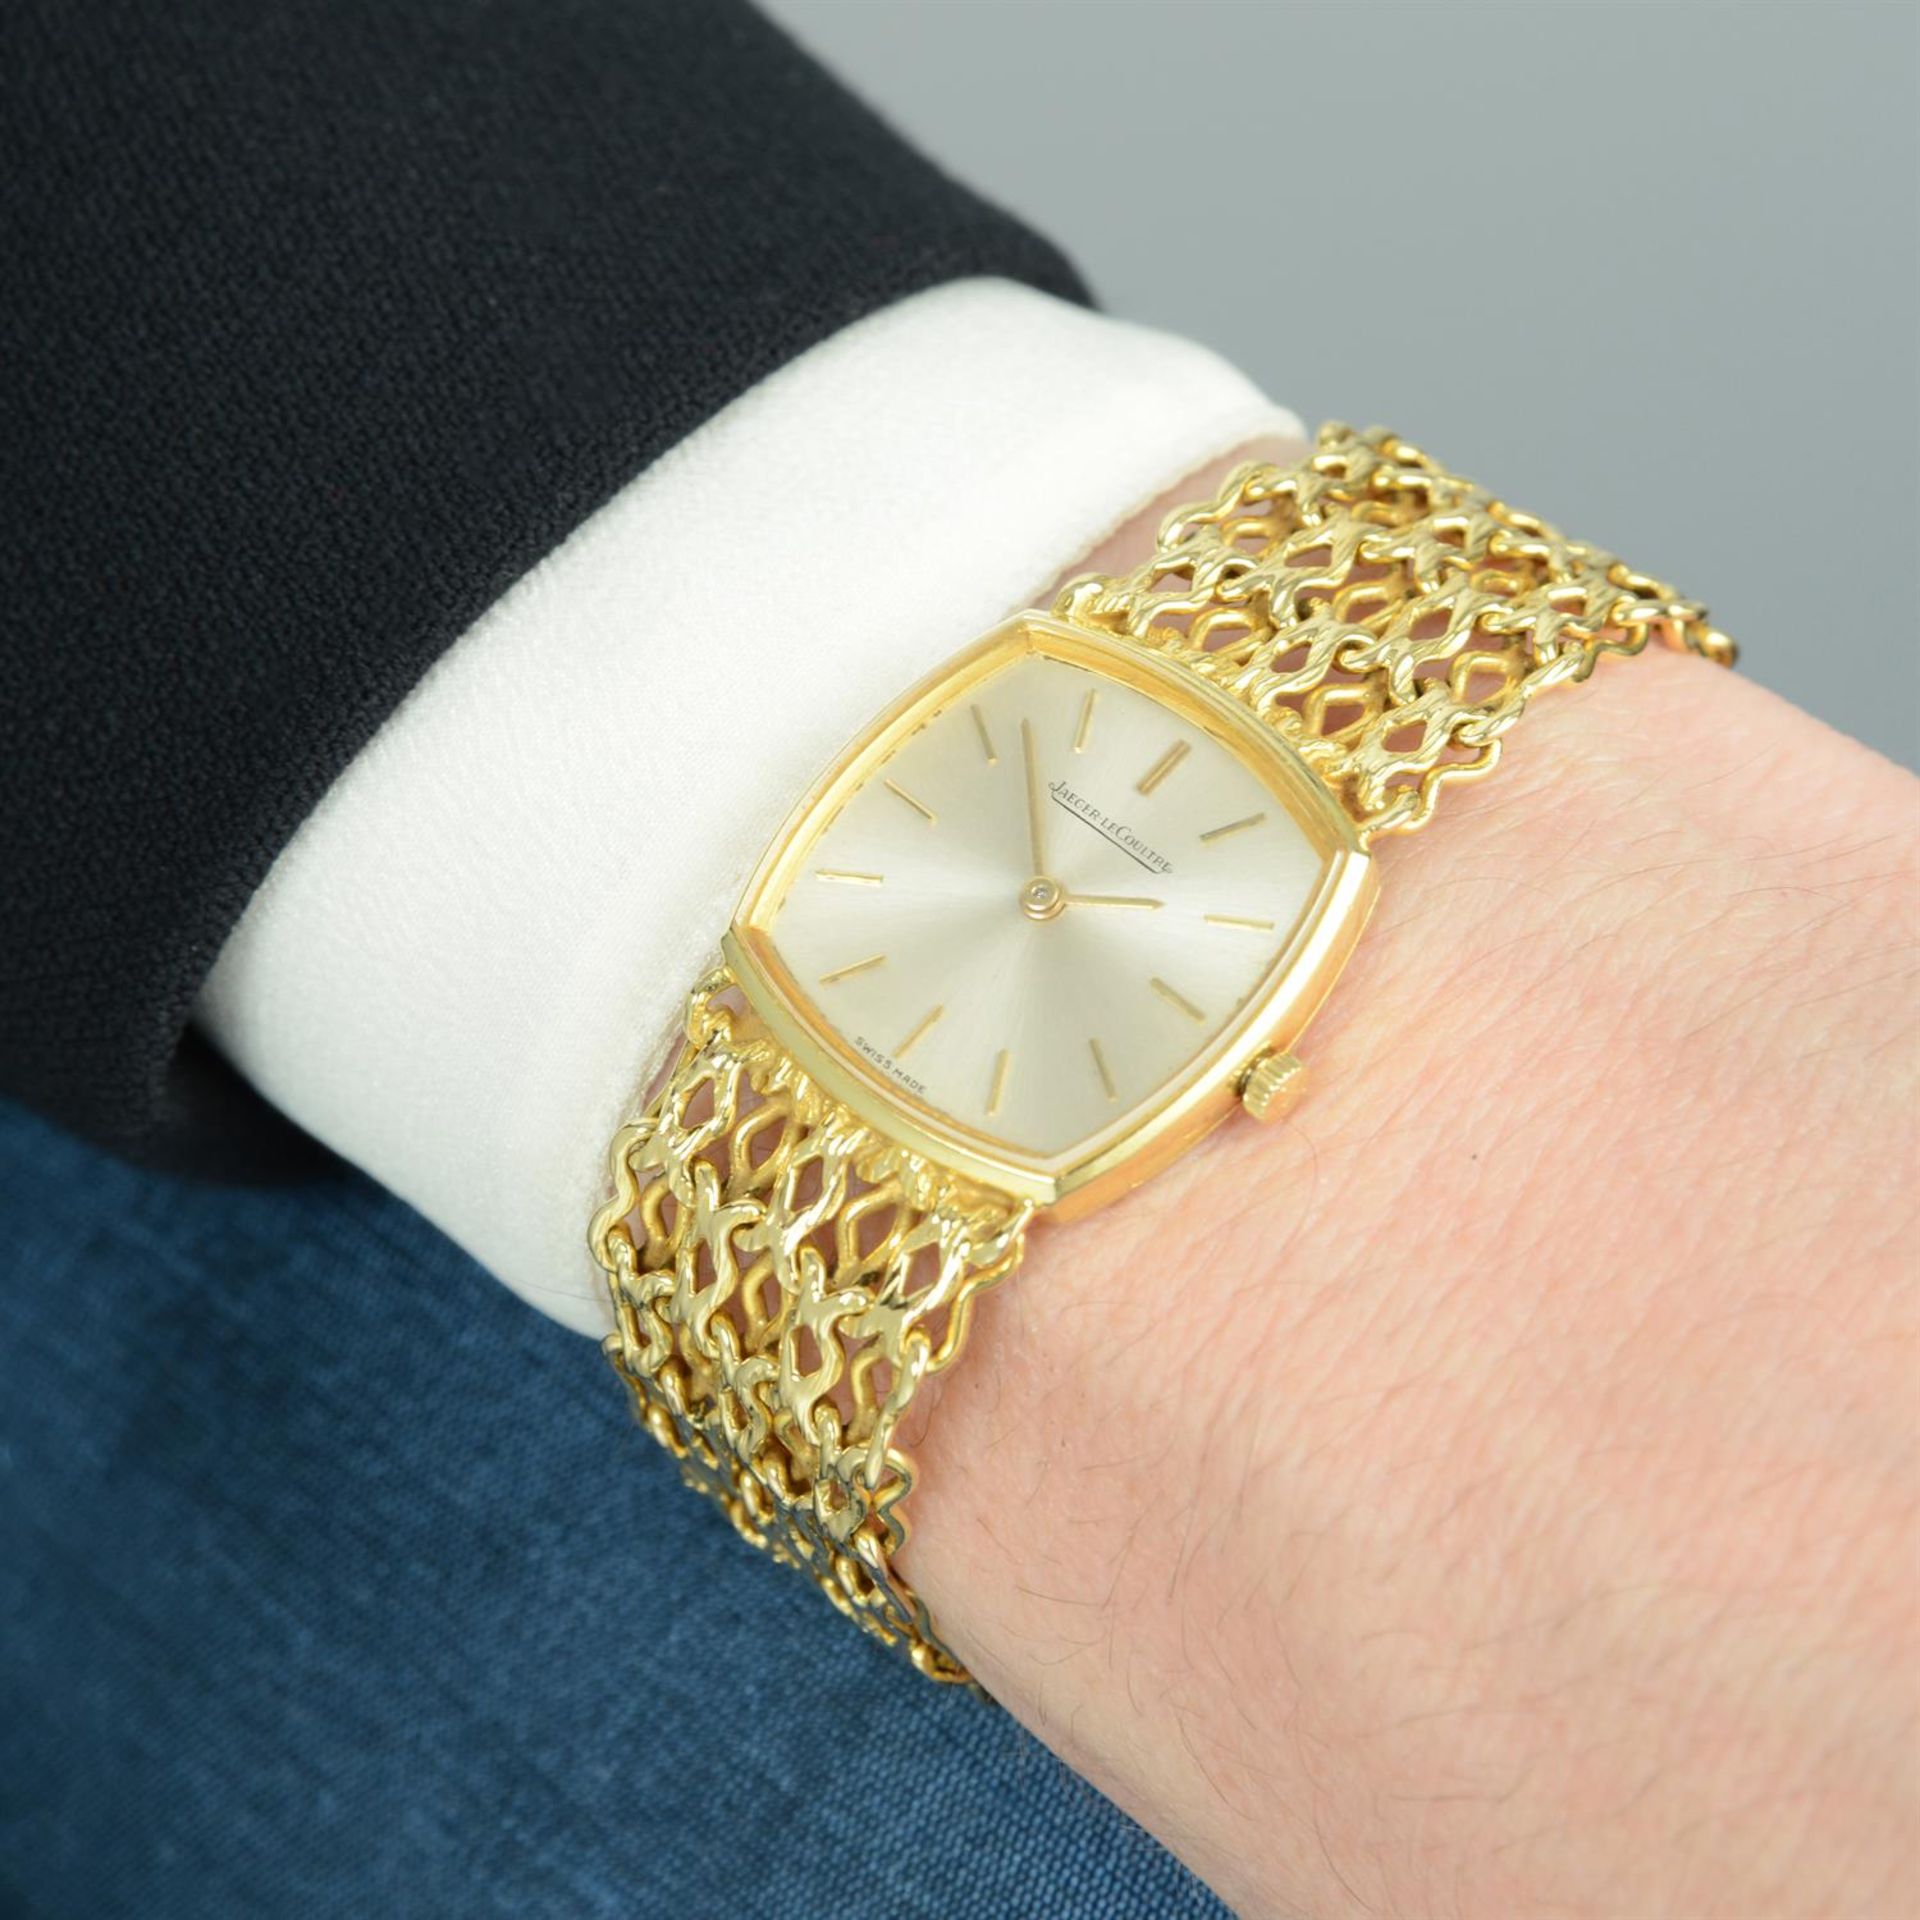 JAEGER-LECOULTRE - an 18ct yellow gold bracelet watch, 23mm. - Image 5 of 5